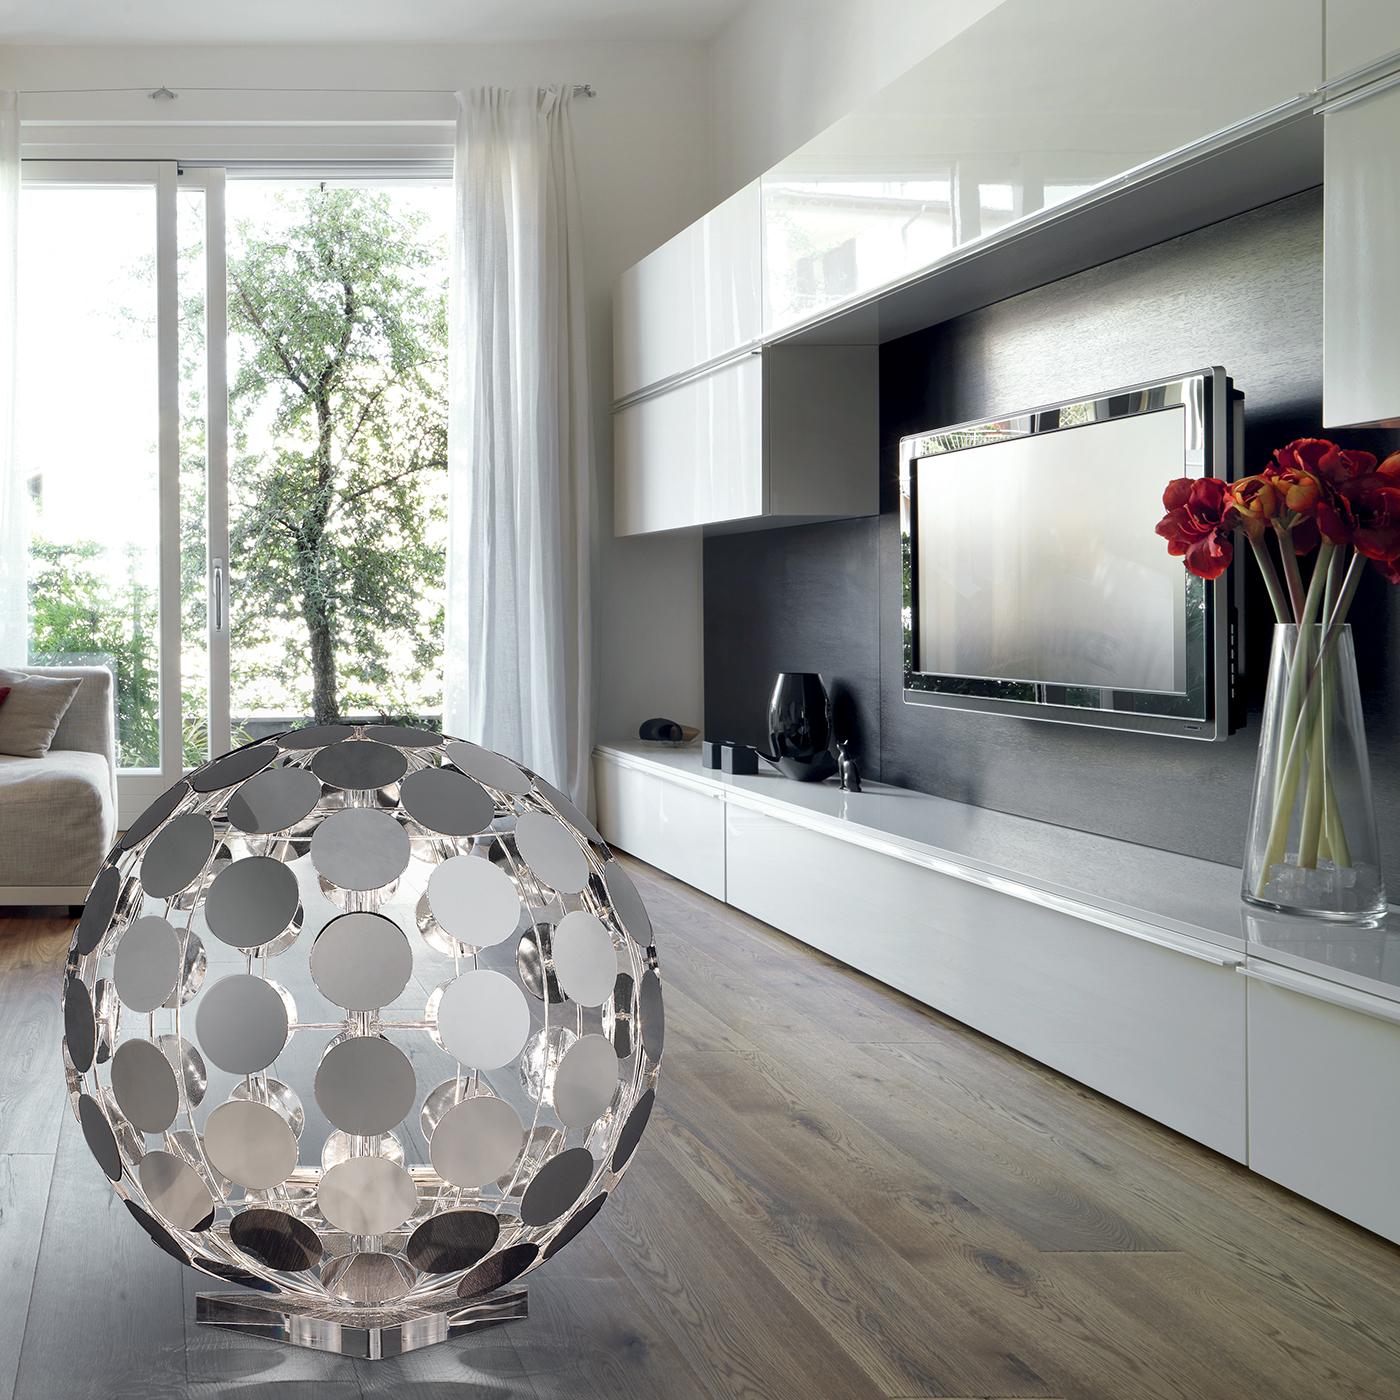 Add a glamorous touch to any living space with this unique floor lamp. Crafted from individual chrome disks arranged into a sleek spherical shape, the disco ball floor lamp reflects the light across the room in a dazzling display of light effects.